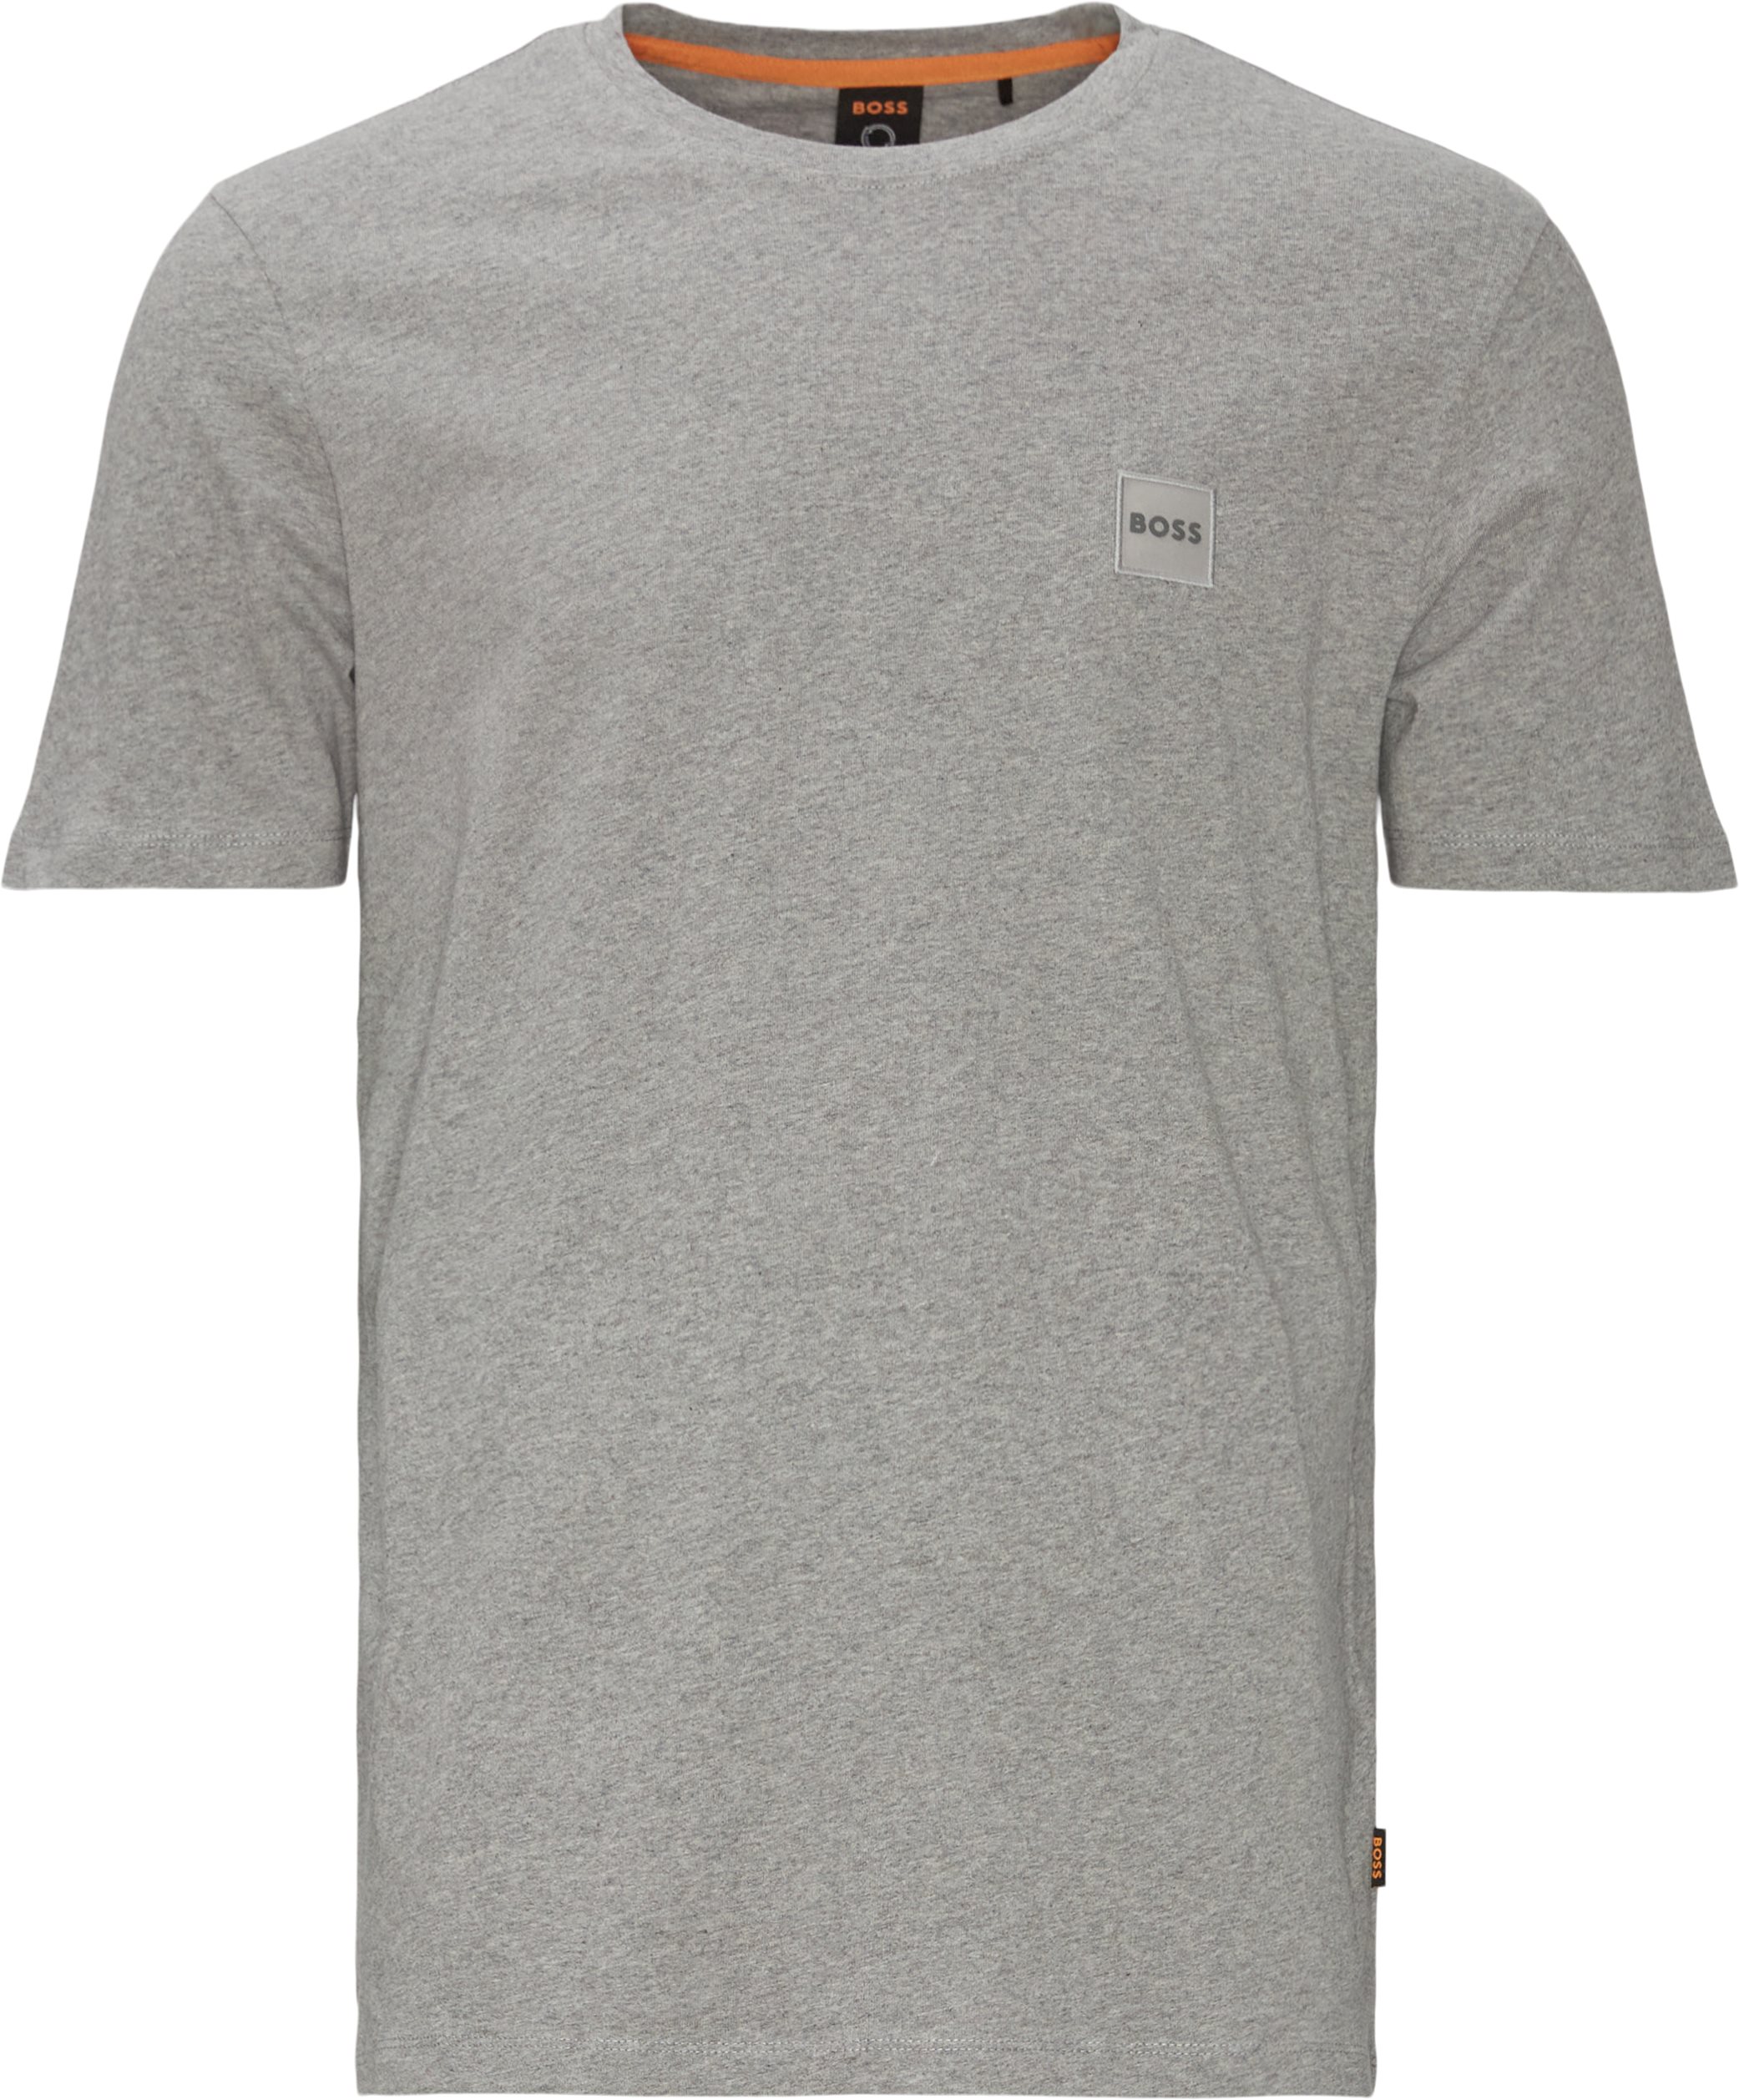 50472584 T-Shirts Grå From Boss Casual 54 Eur